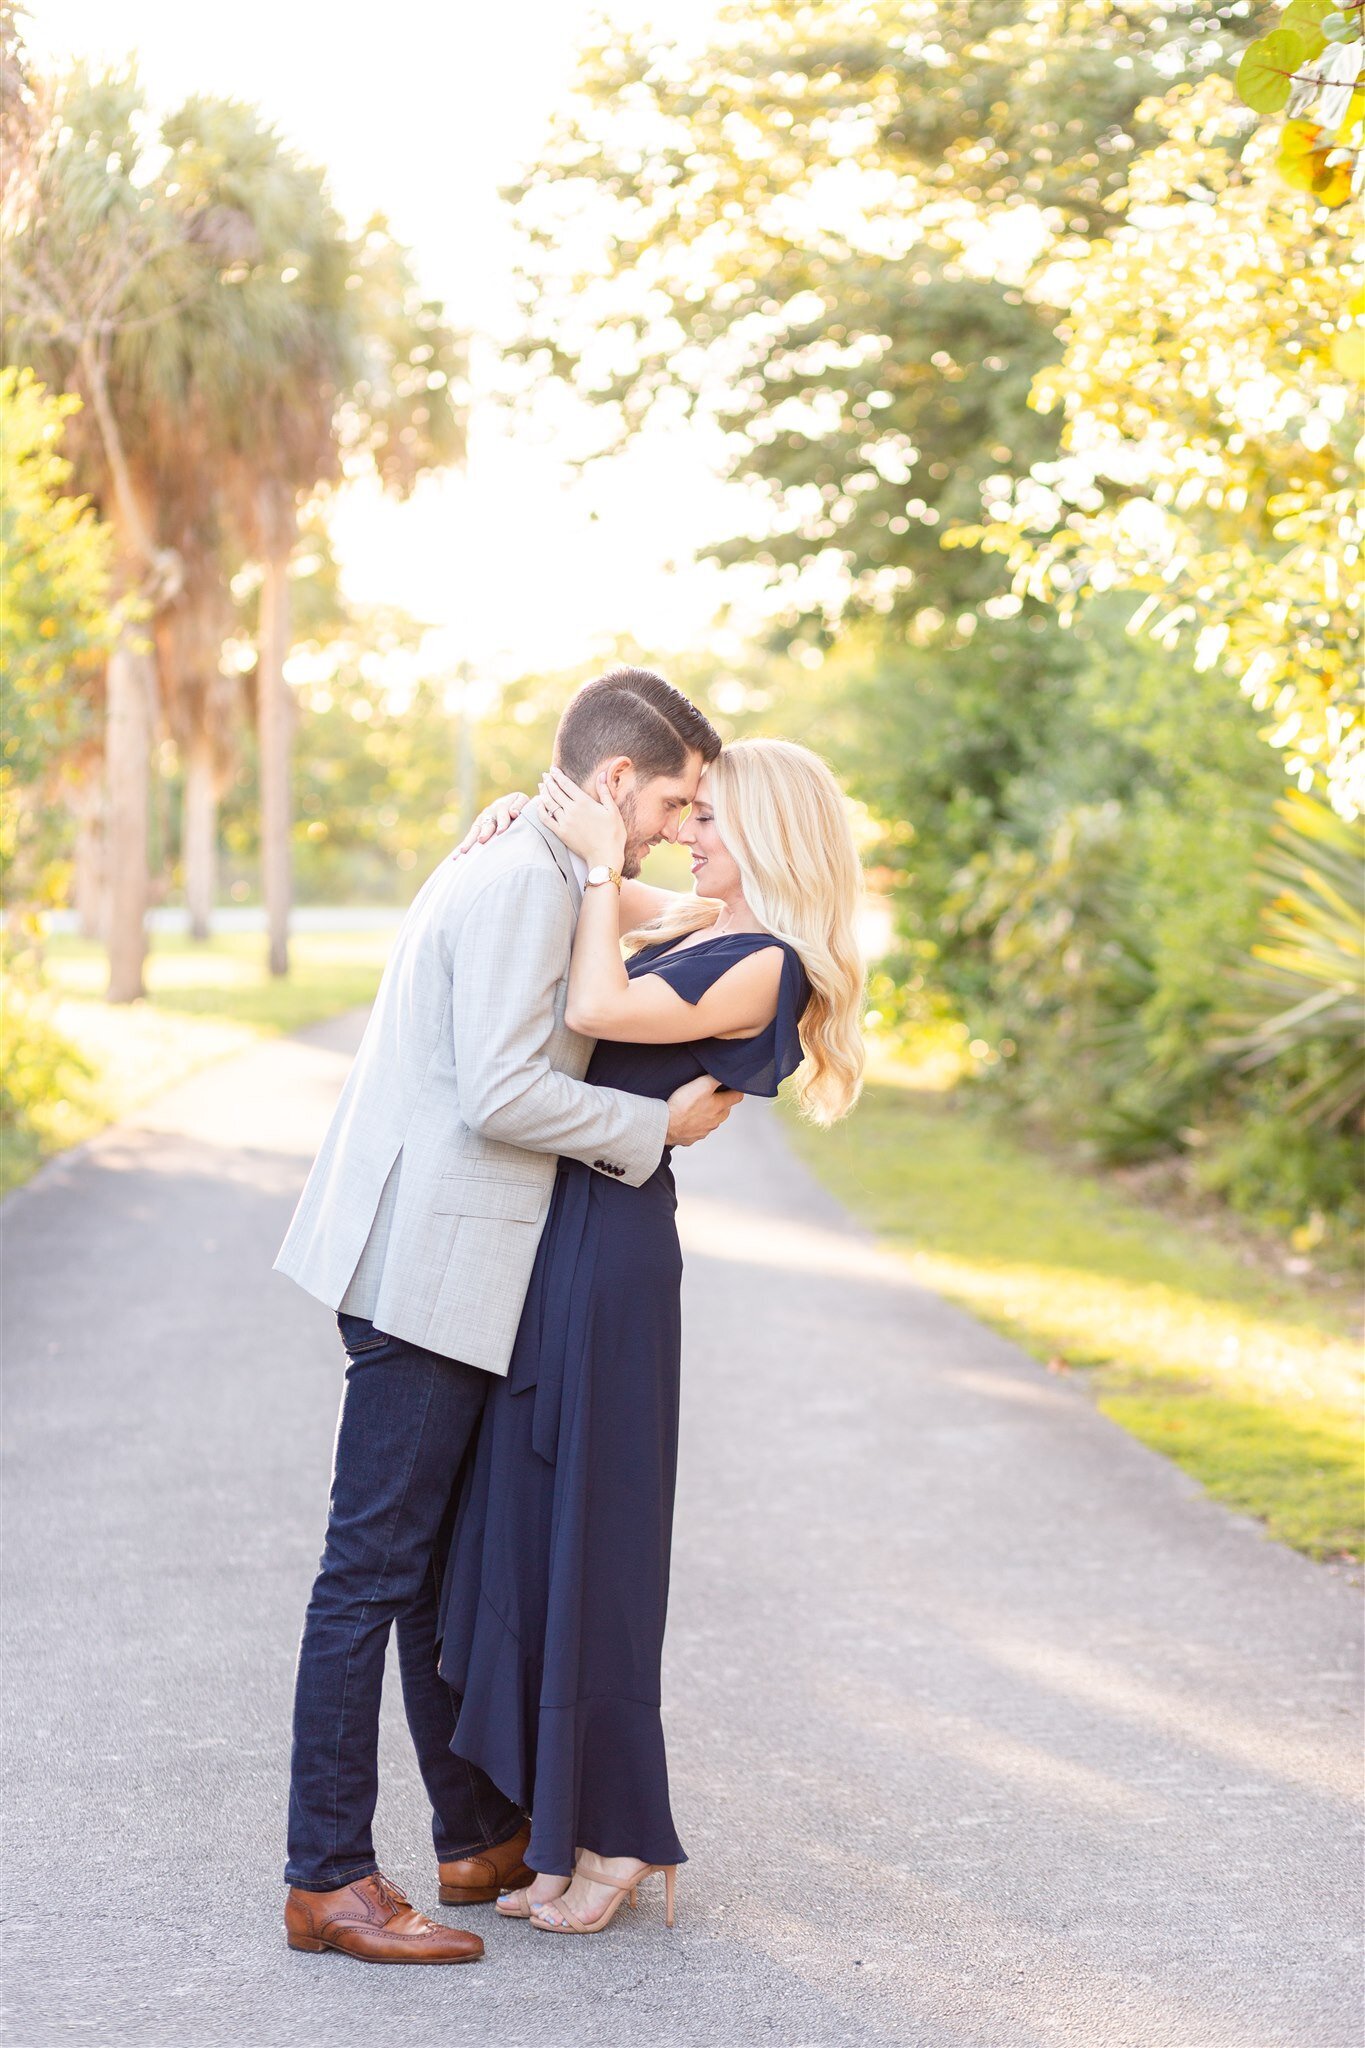 Nicolle-Matias-Bill-Baggs-State-Park-Engagement-Session-Miami-Wedding-Photographers-Chris-and-Micaela-Photography-62